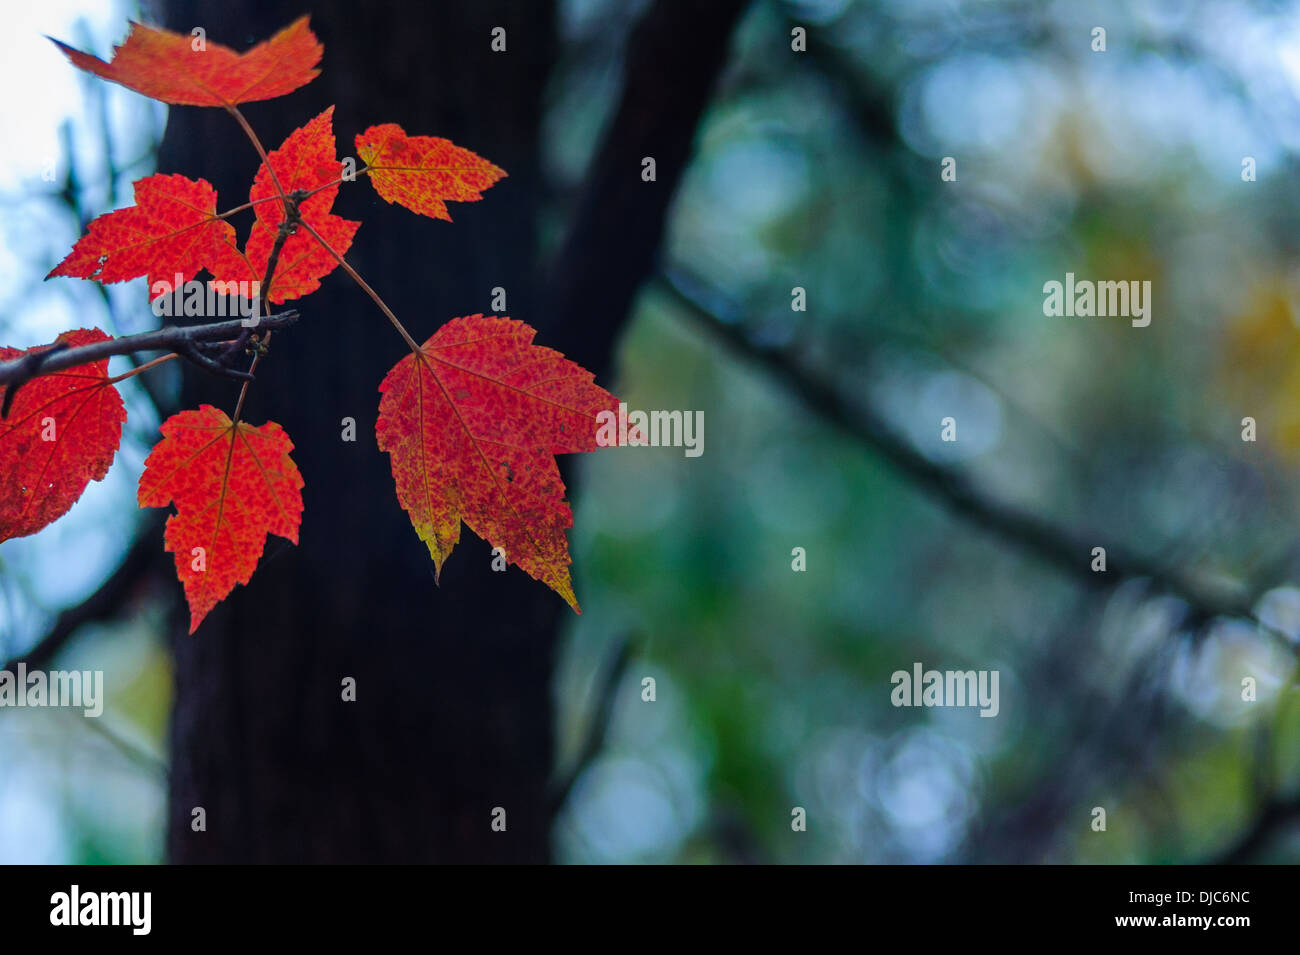 Photograph of red maple leaves against a natural blurred background. Stock Photo